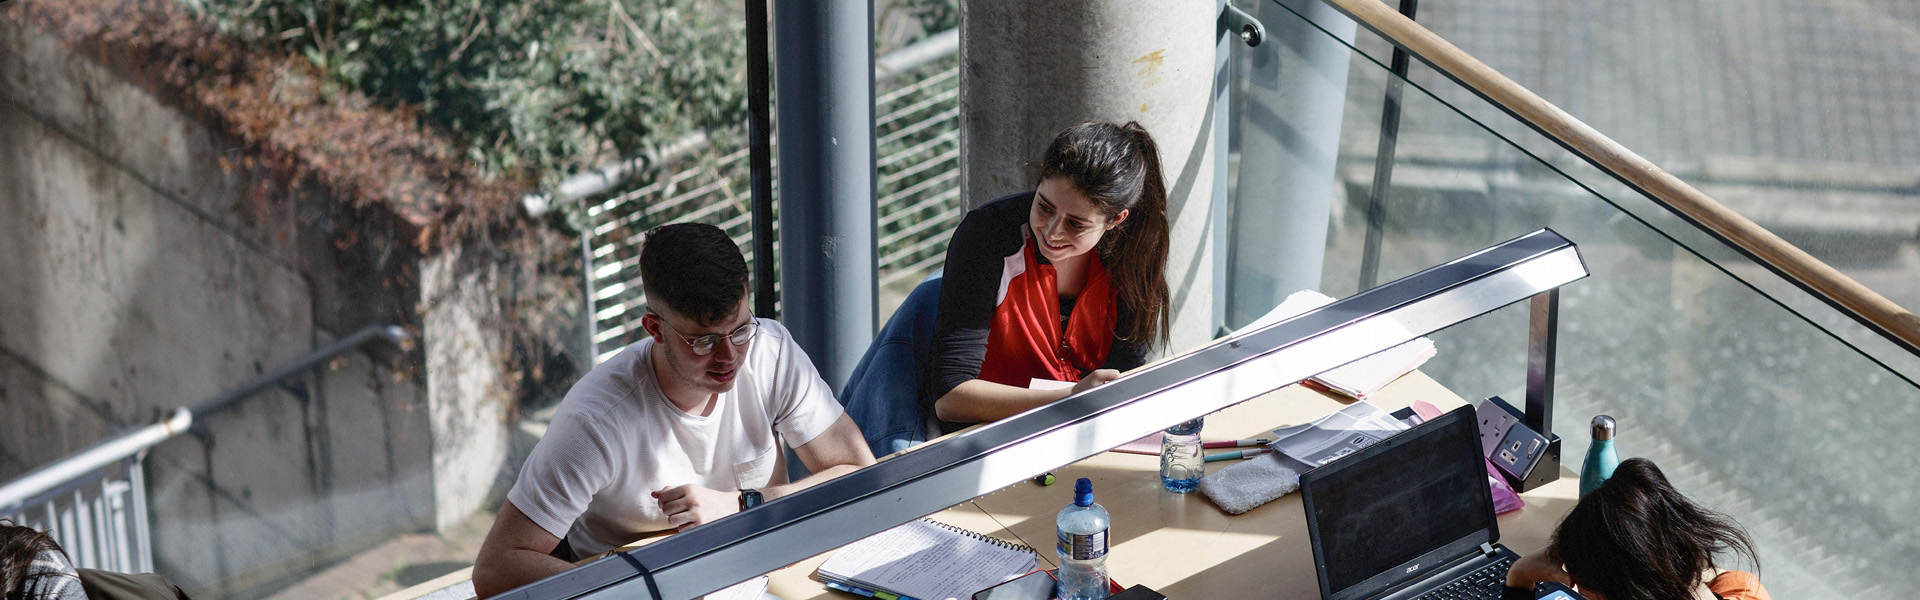 Students studying at a desk in a library on campus